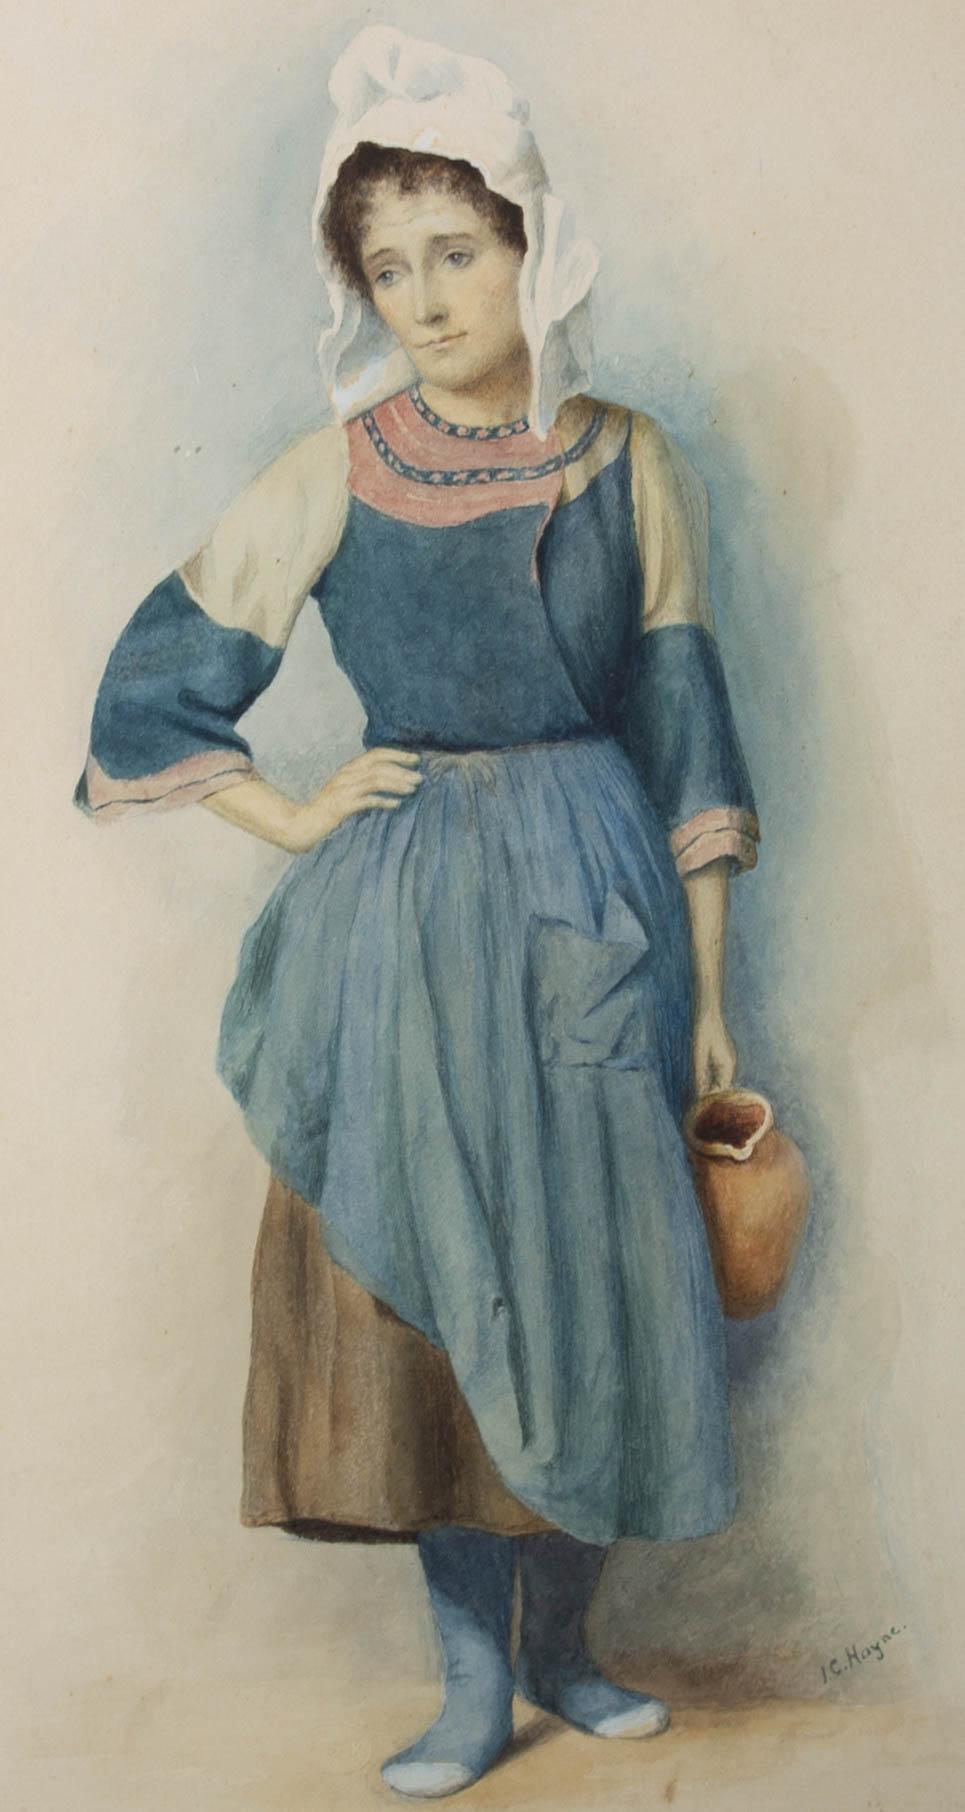 A charming portrait of a milkmaid in a blue dress and white bonnet. She holds an earthenware jug in one hand and places the other on her hip. Painted in fine detail, the artist has captured the woman's morose but gentle expression. Signed to the